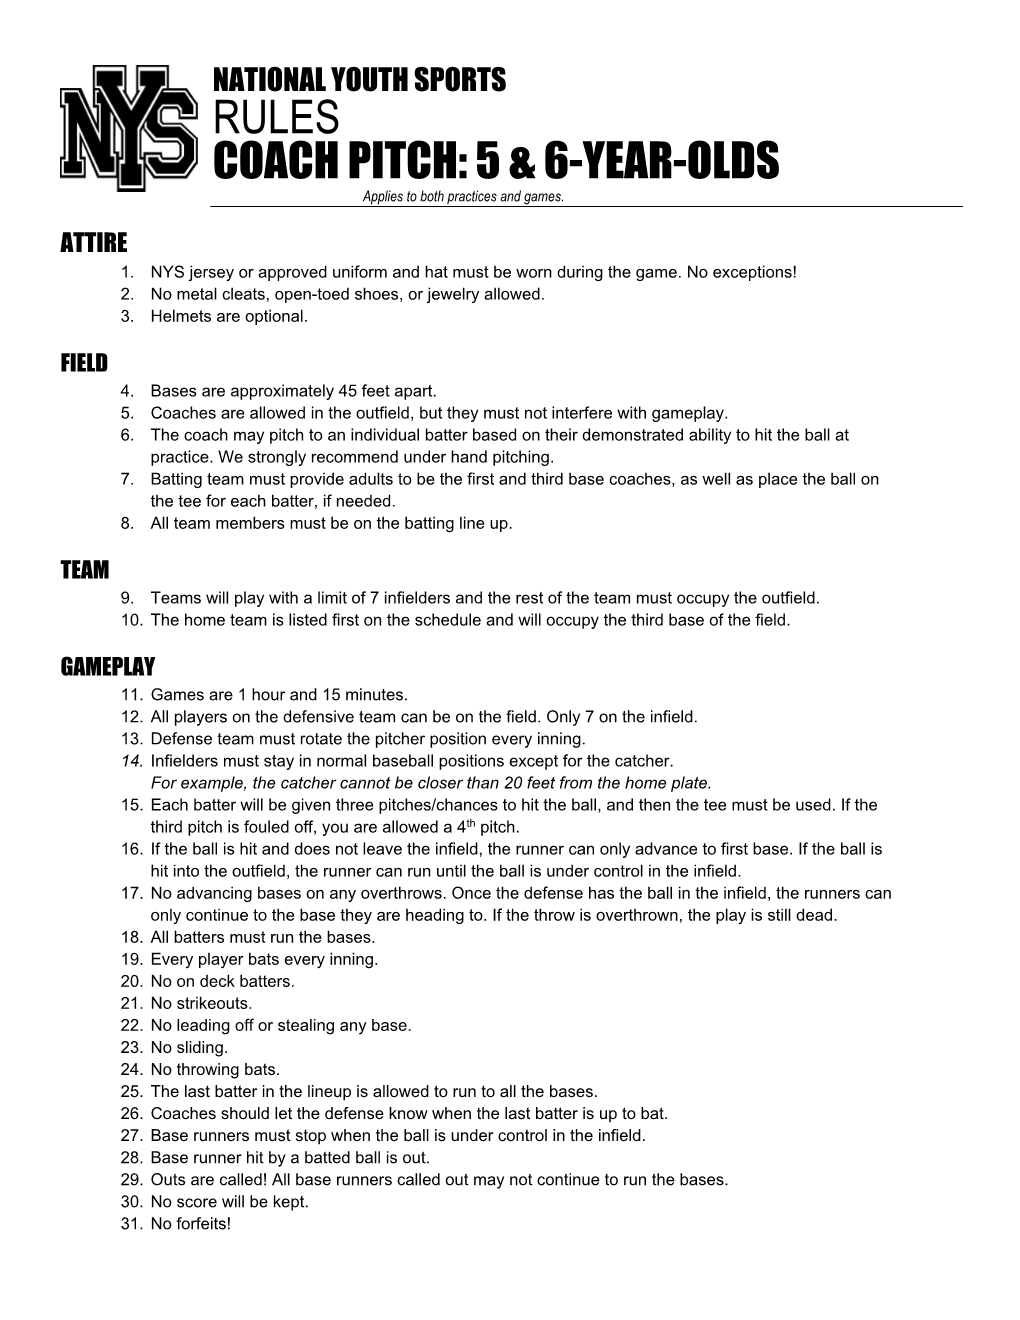 RULES COACH PITCH: 5 & 6-YEAR-OLDS Applies to Both Practices and Games